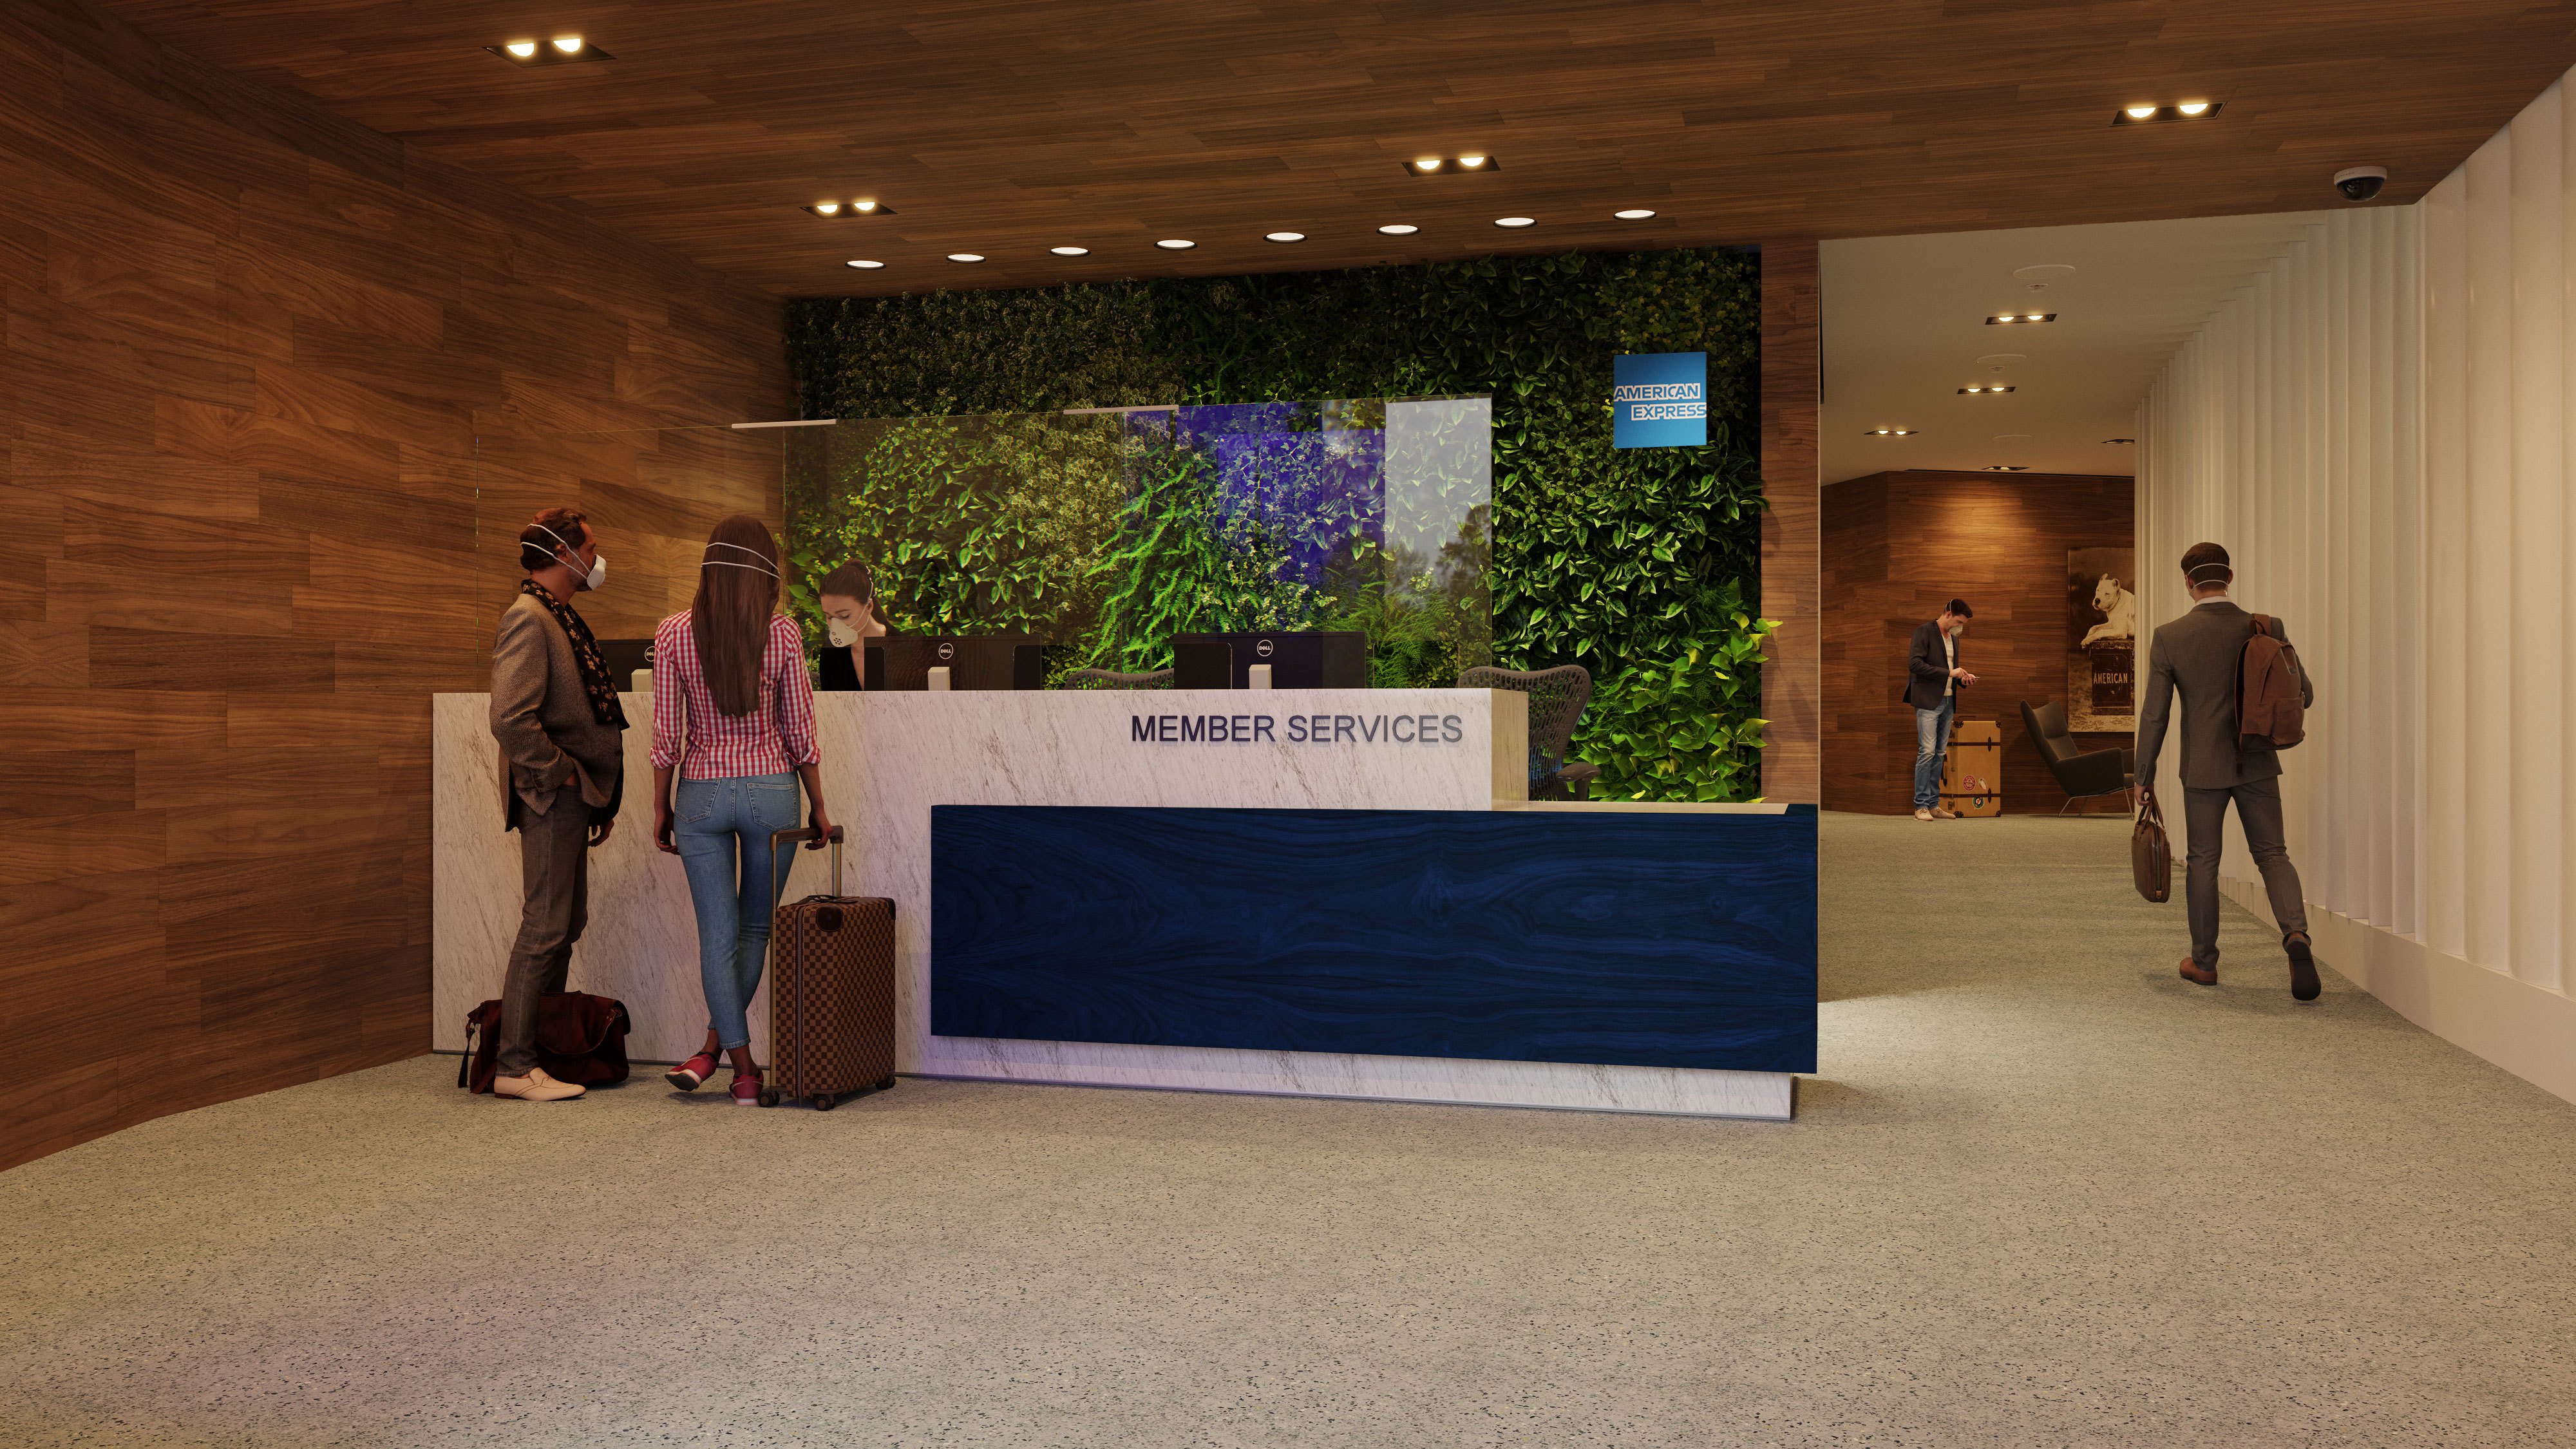 American Express Announces Plans to Expand Centurion® Lounges in Two Major  . Airports and Prepares to Welcome Travelers with New Health and Safety  Practices | Business Wire